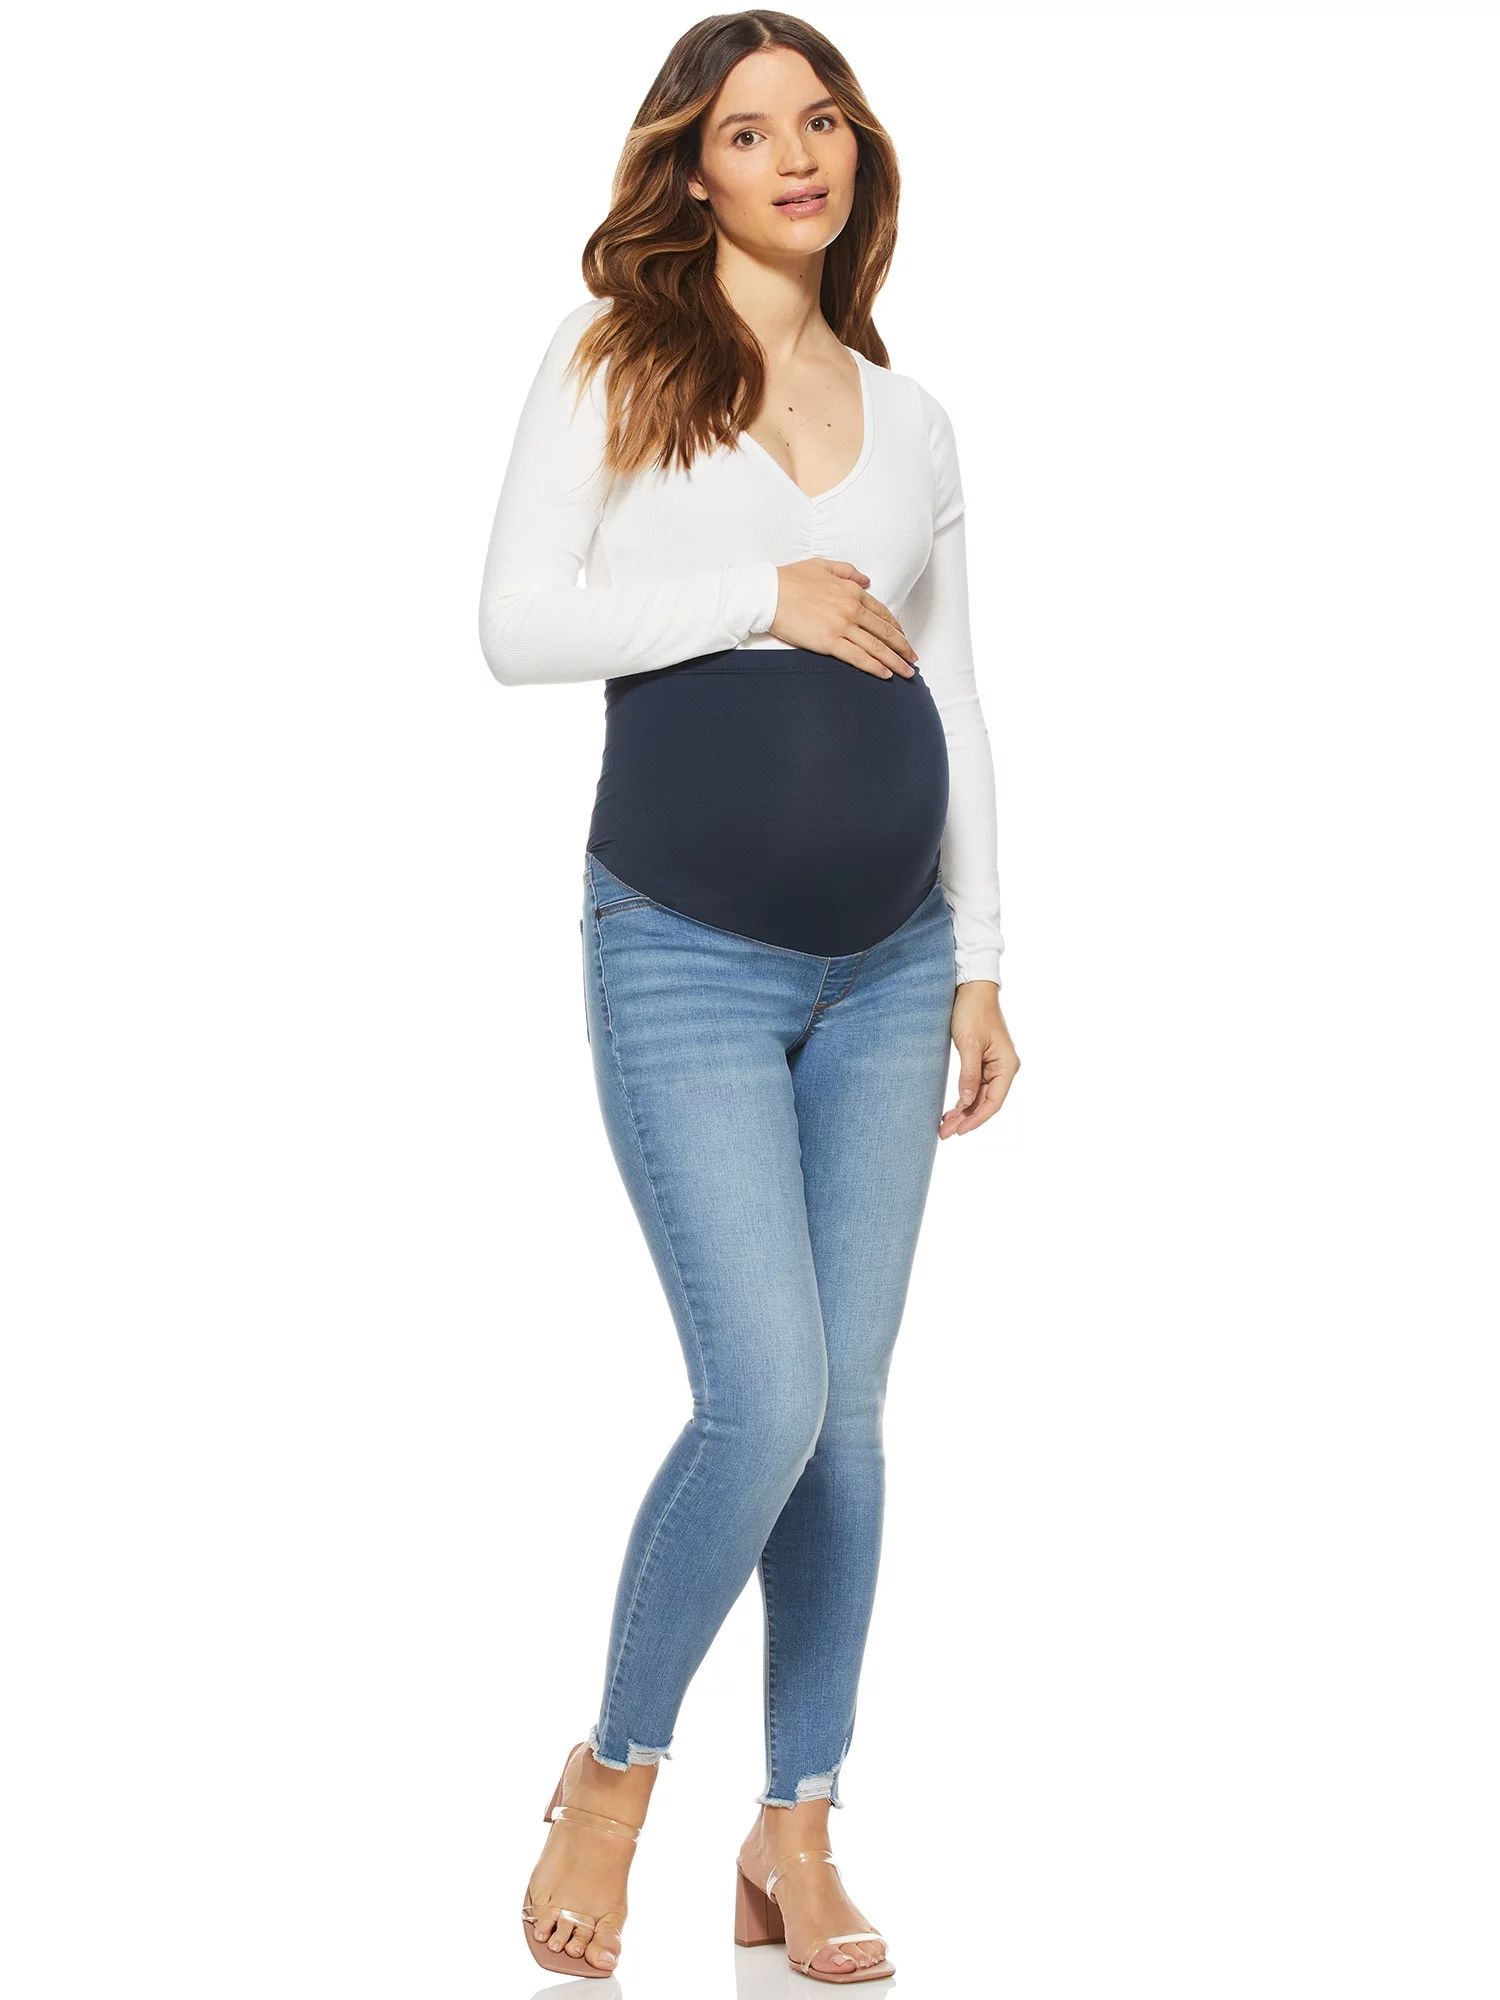 Sofia Jeans by Sofia Vergara Women's Maternity Rosa Curvy Jeans with Full Belly Band | Walmart (US)